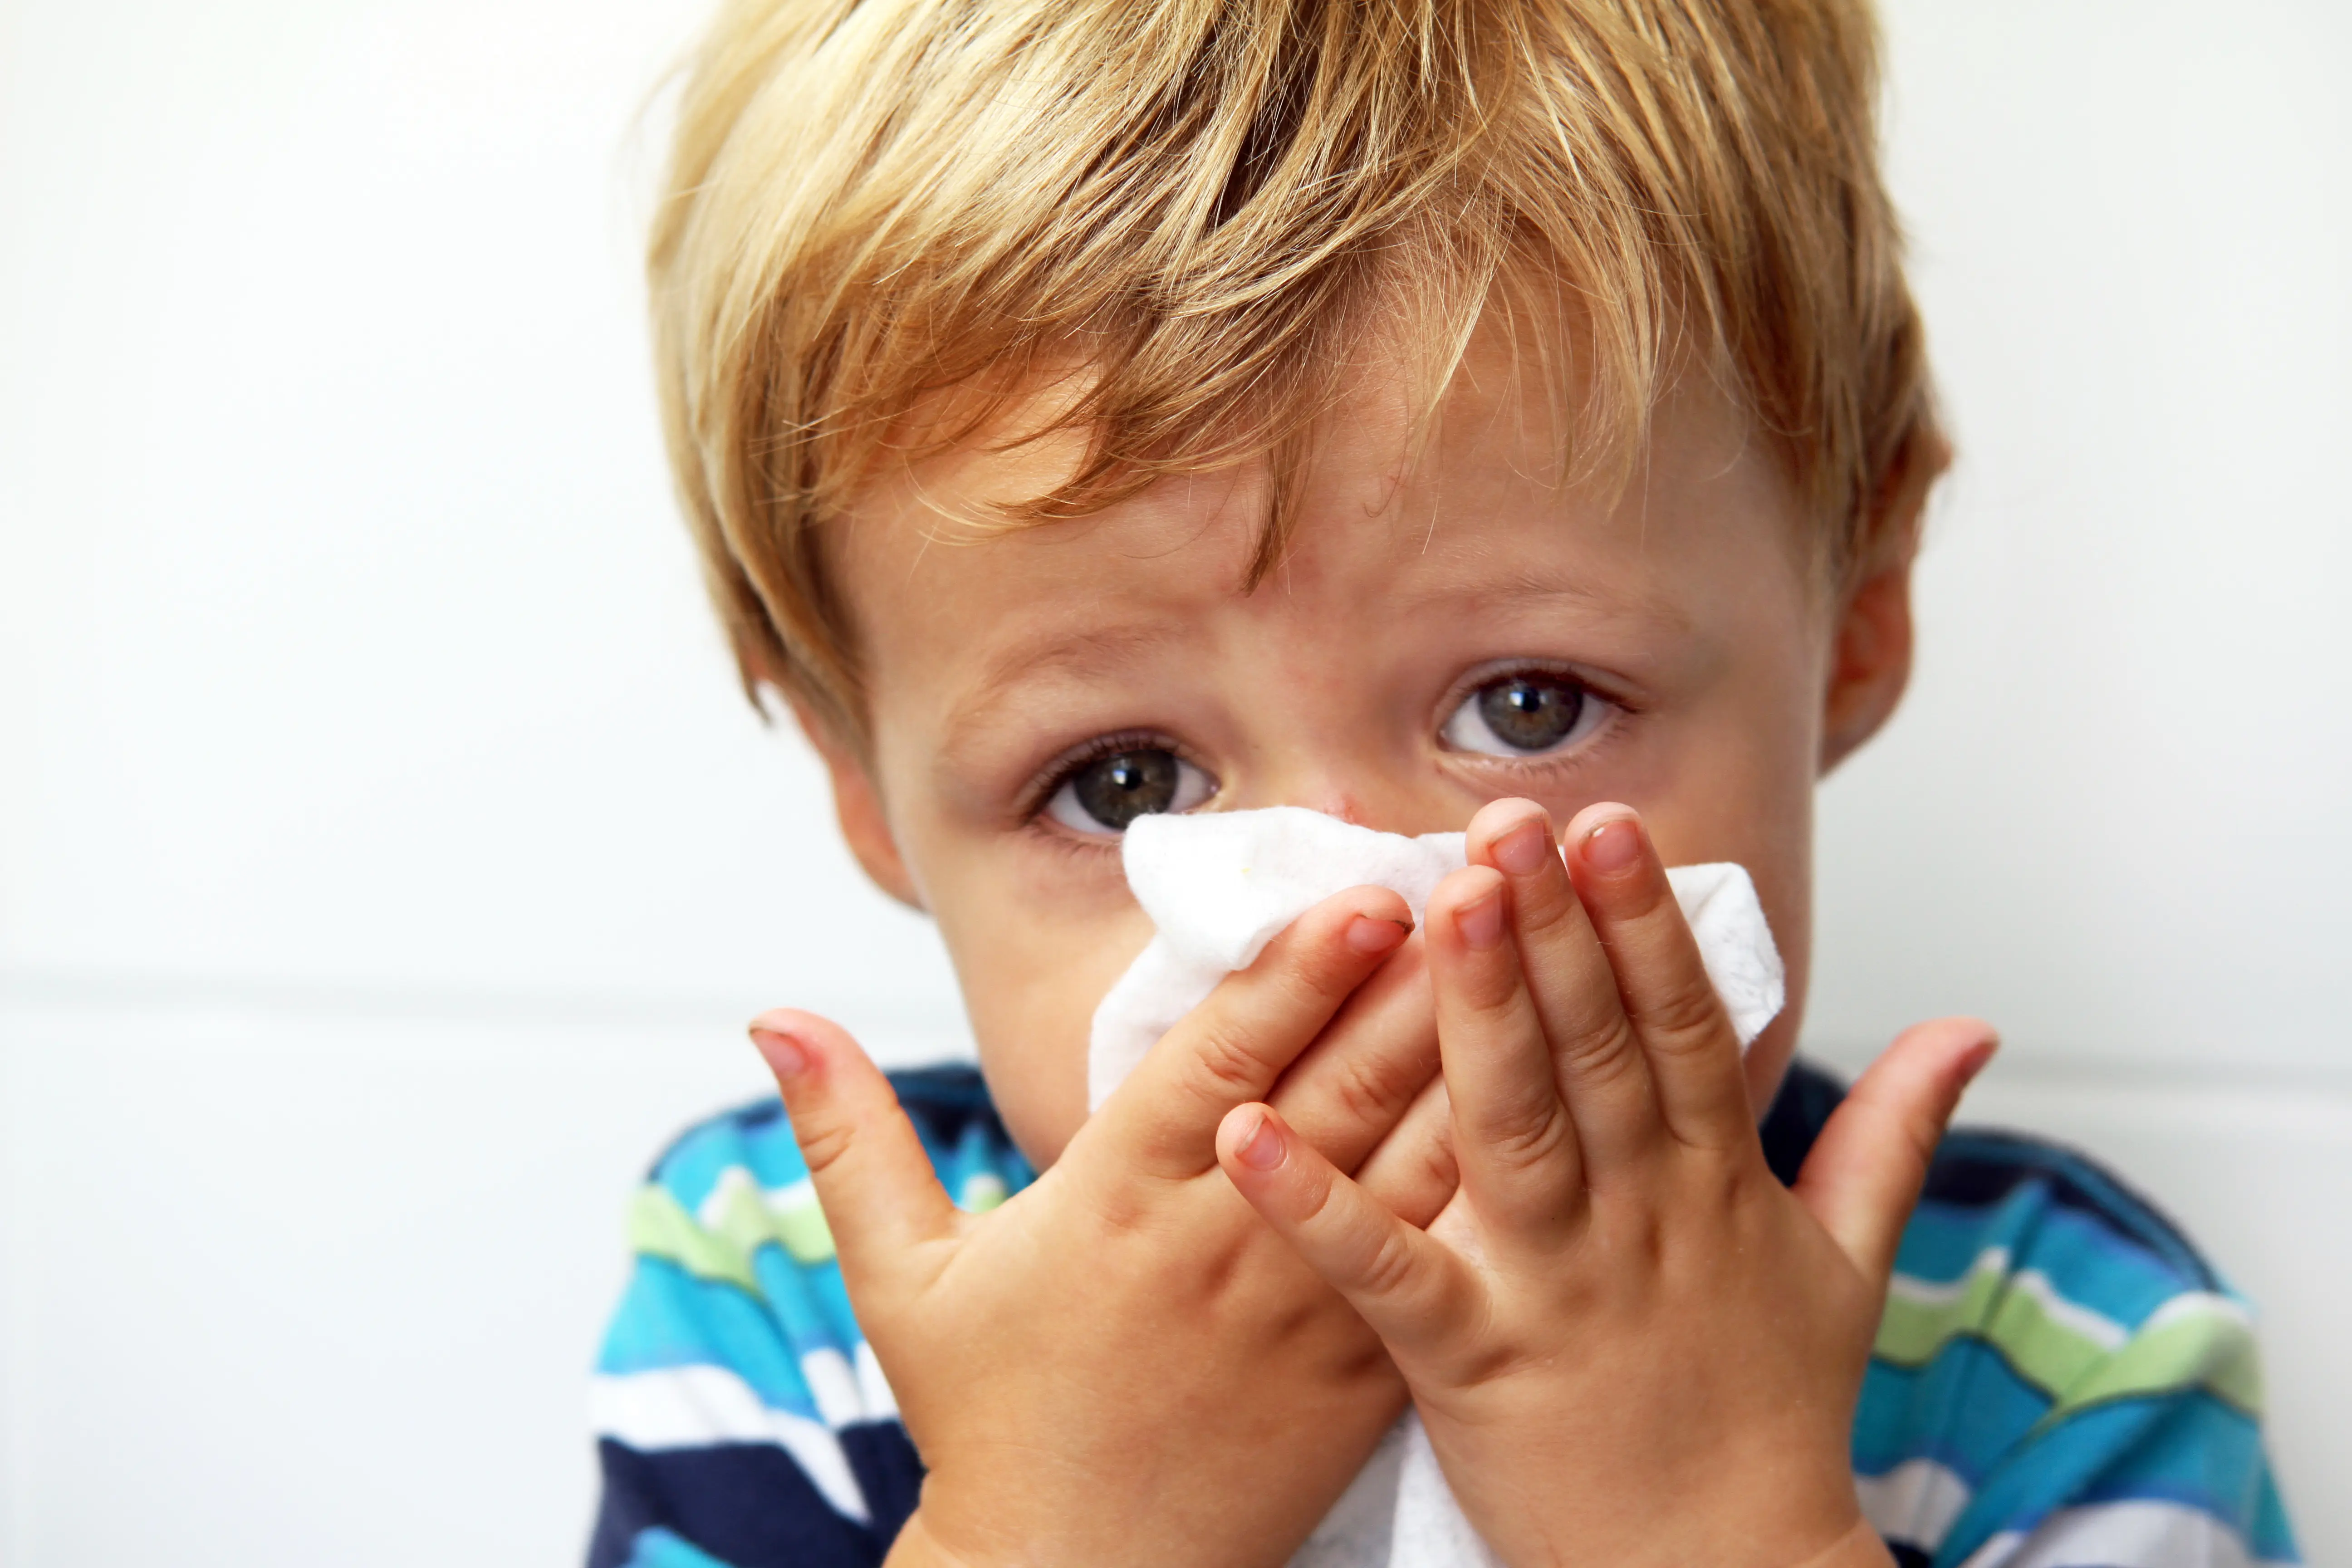 Young child looking unhappy holding tissue to nose